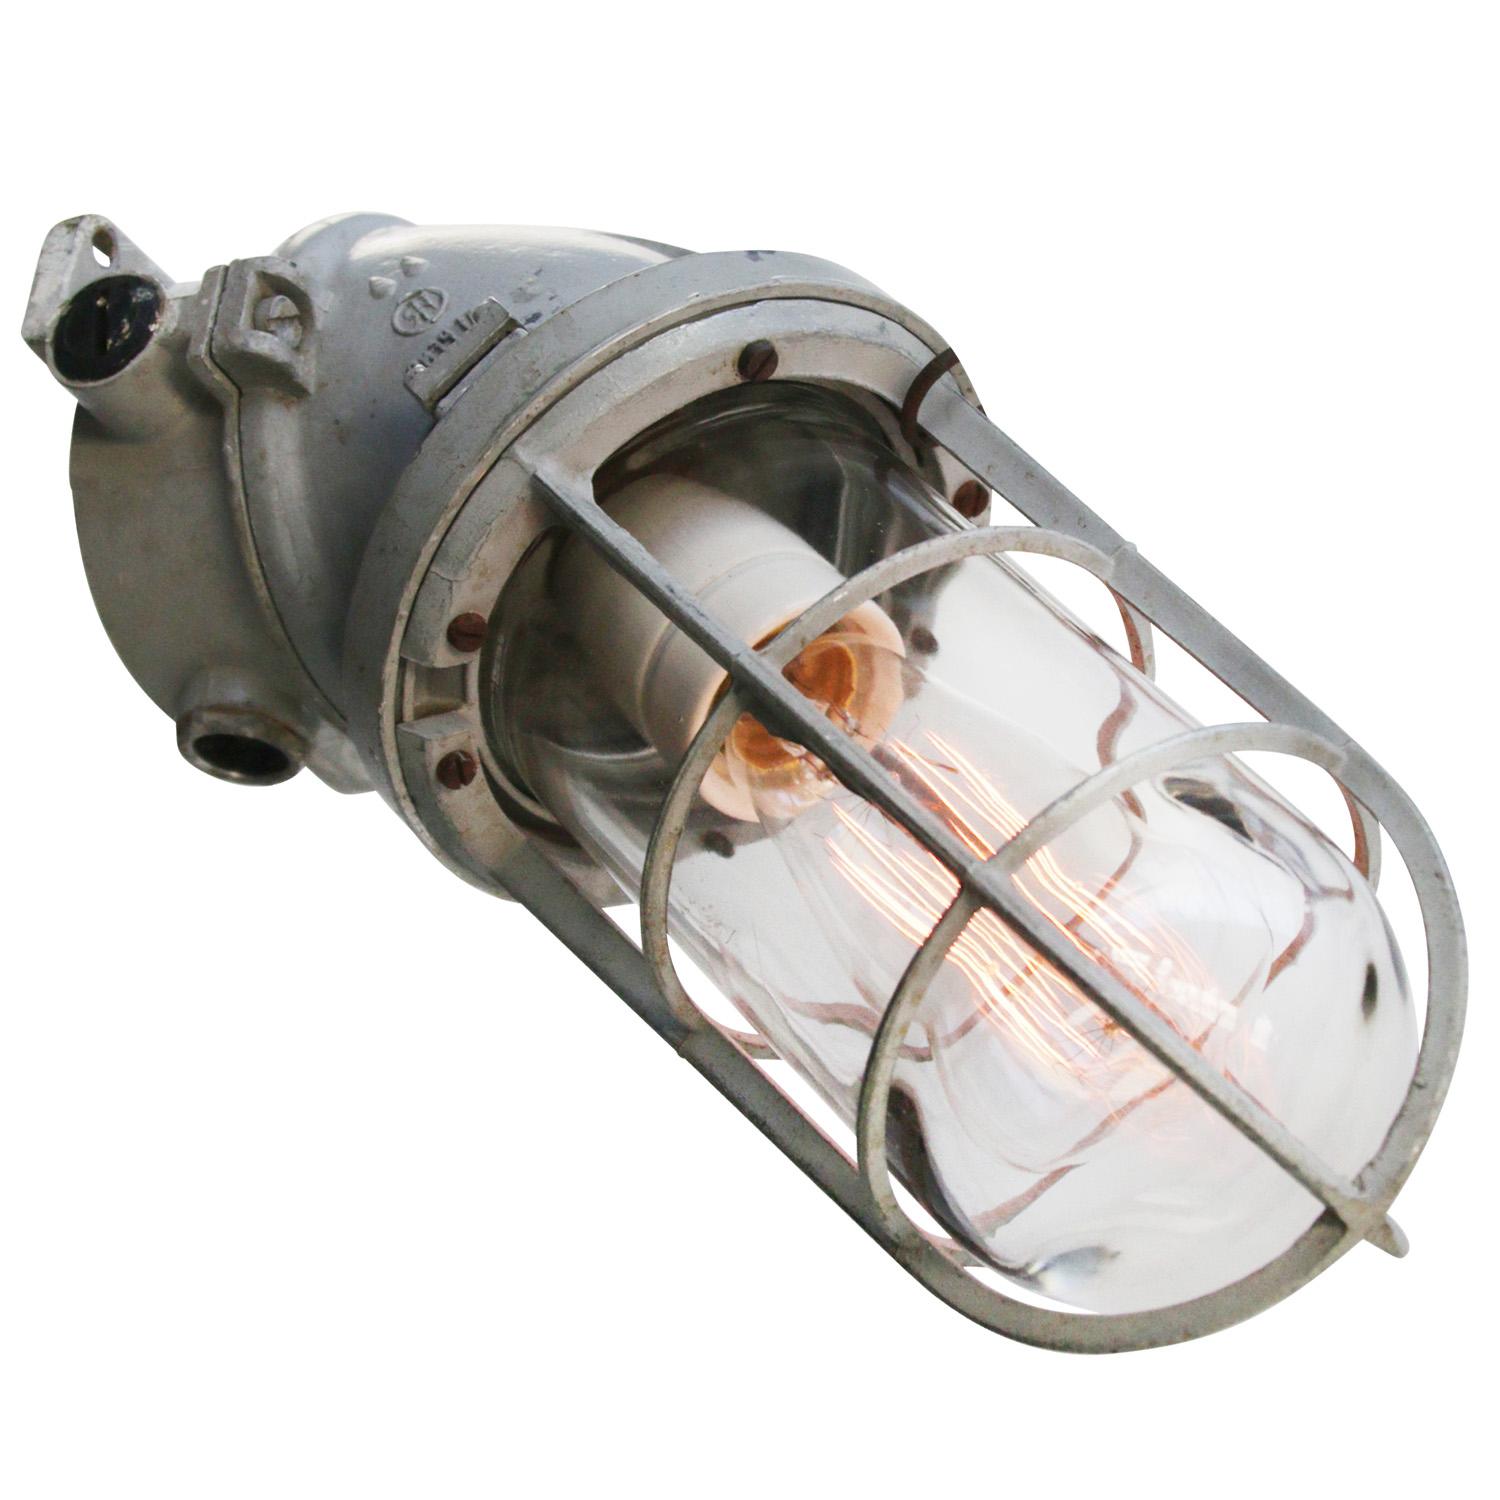 Dutch industrial wall lamp made by ‘Industria Rotterdam’
Aluminum with clear glass

Weight: 1.70 kg / 3.7 lb

Priced per individual item. All lamps have been made suitable by international standards for incandescent light bulbs,